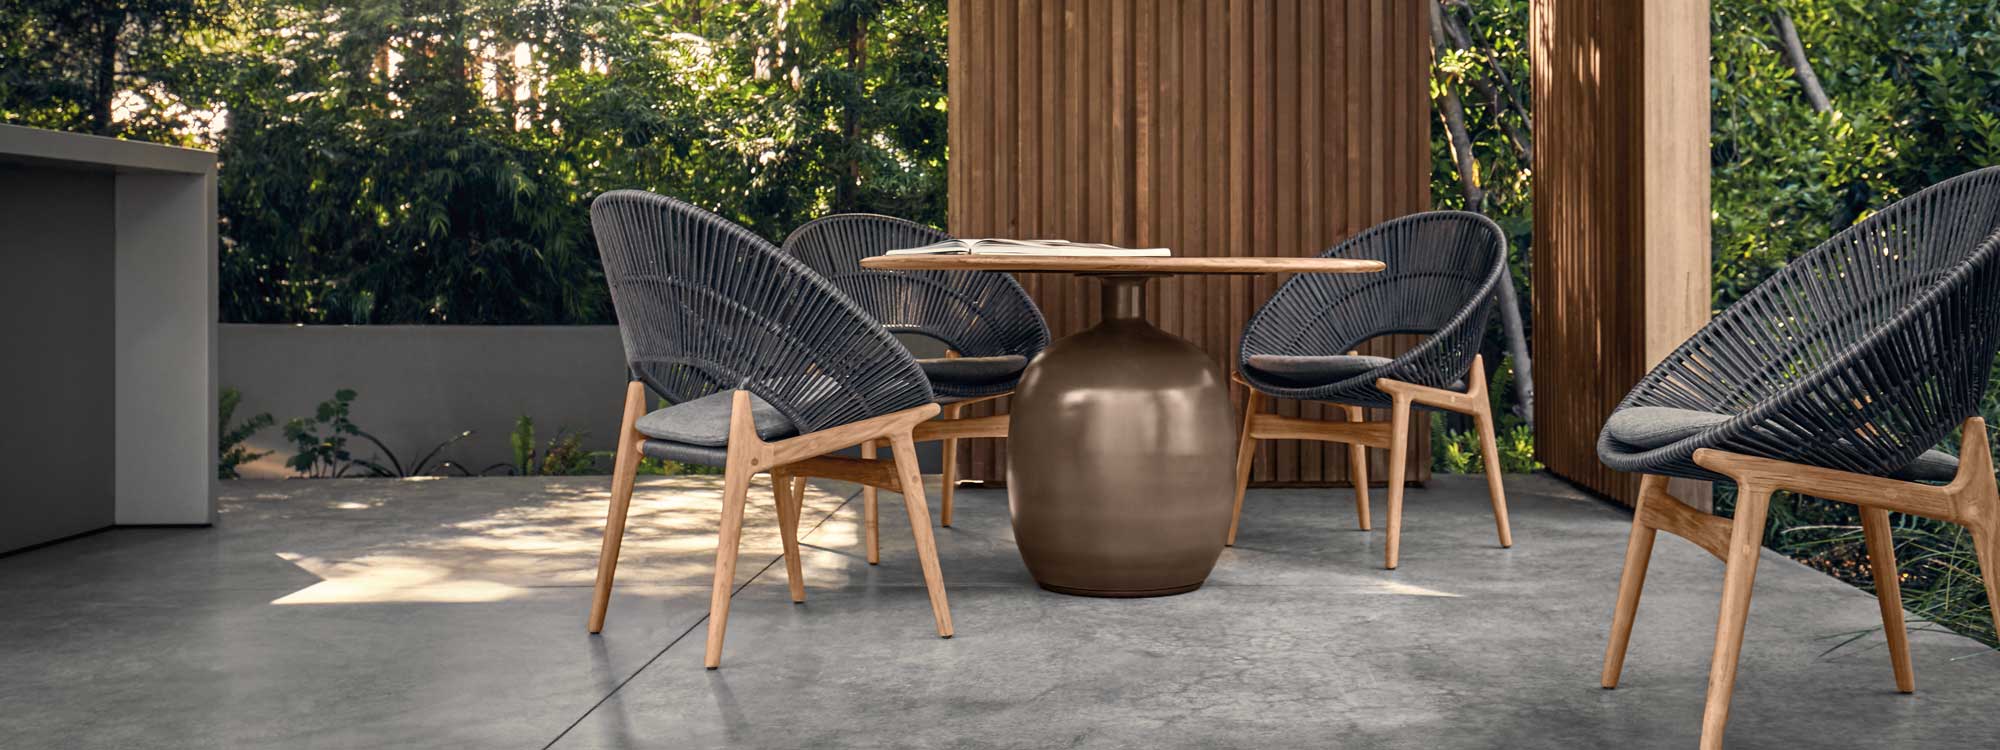 Image of Kasha glazed ceramic garden table and Bora dining chairs by Gloster